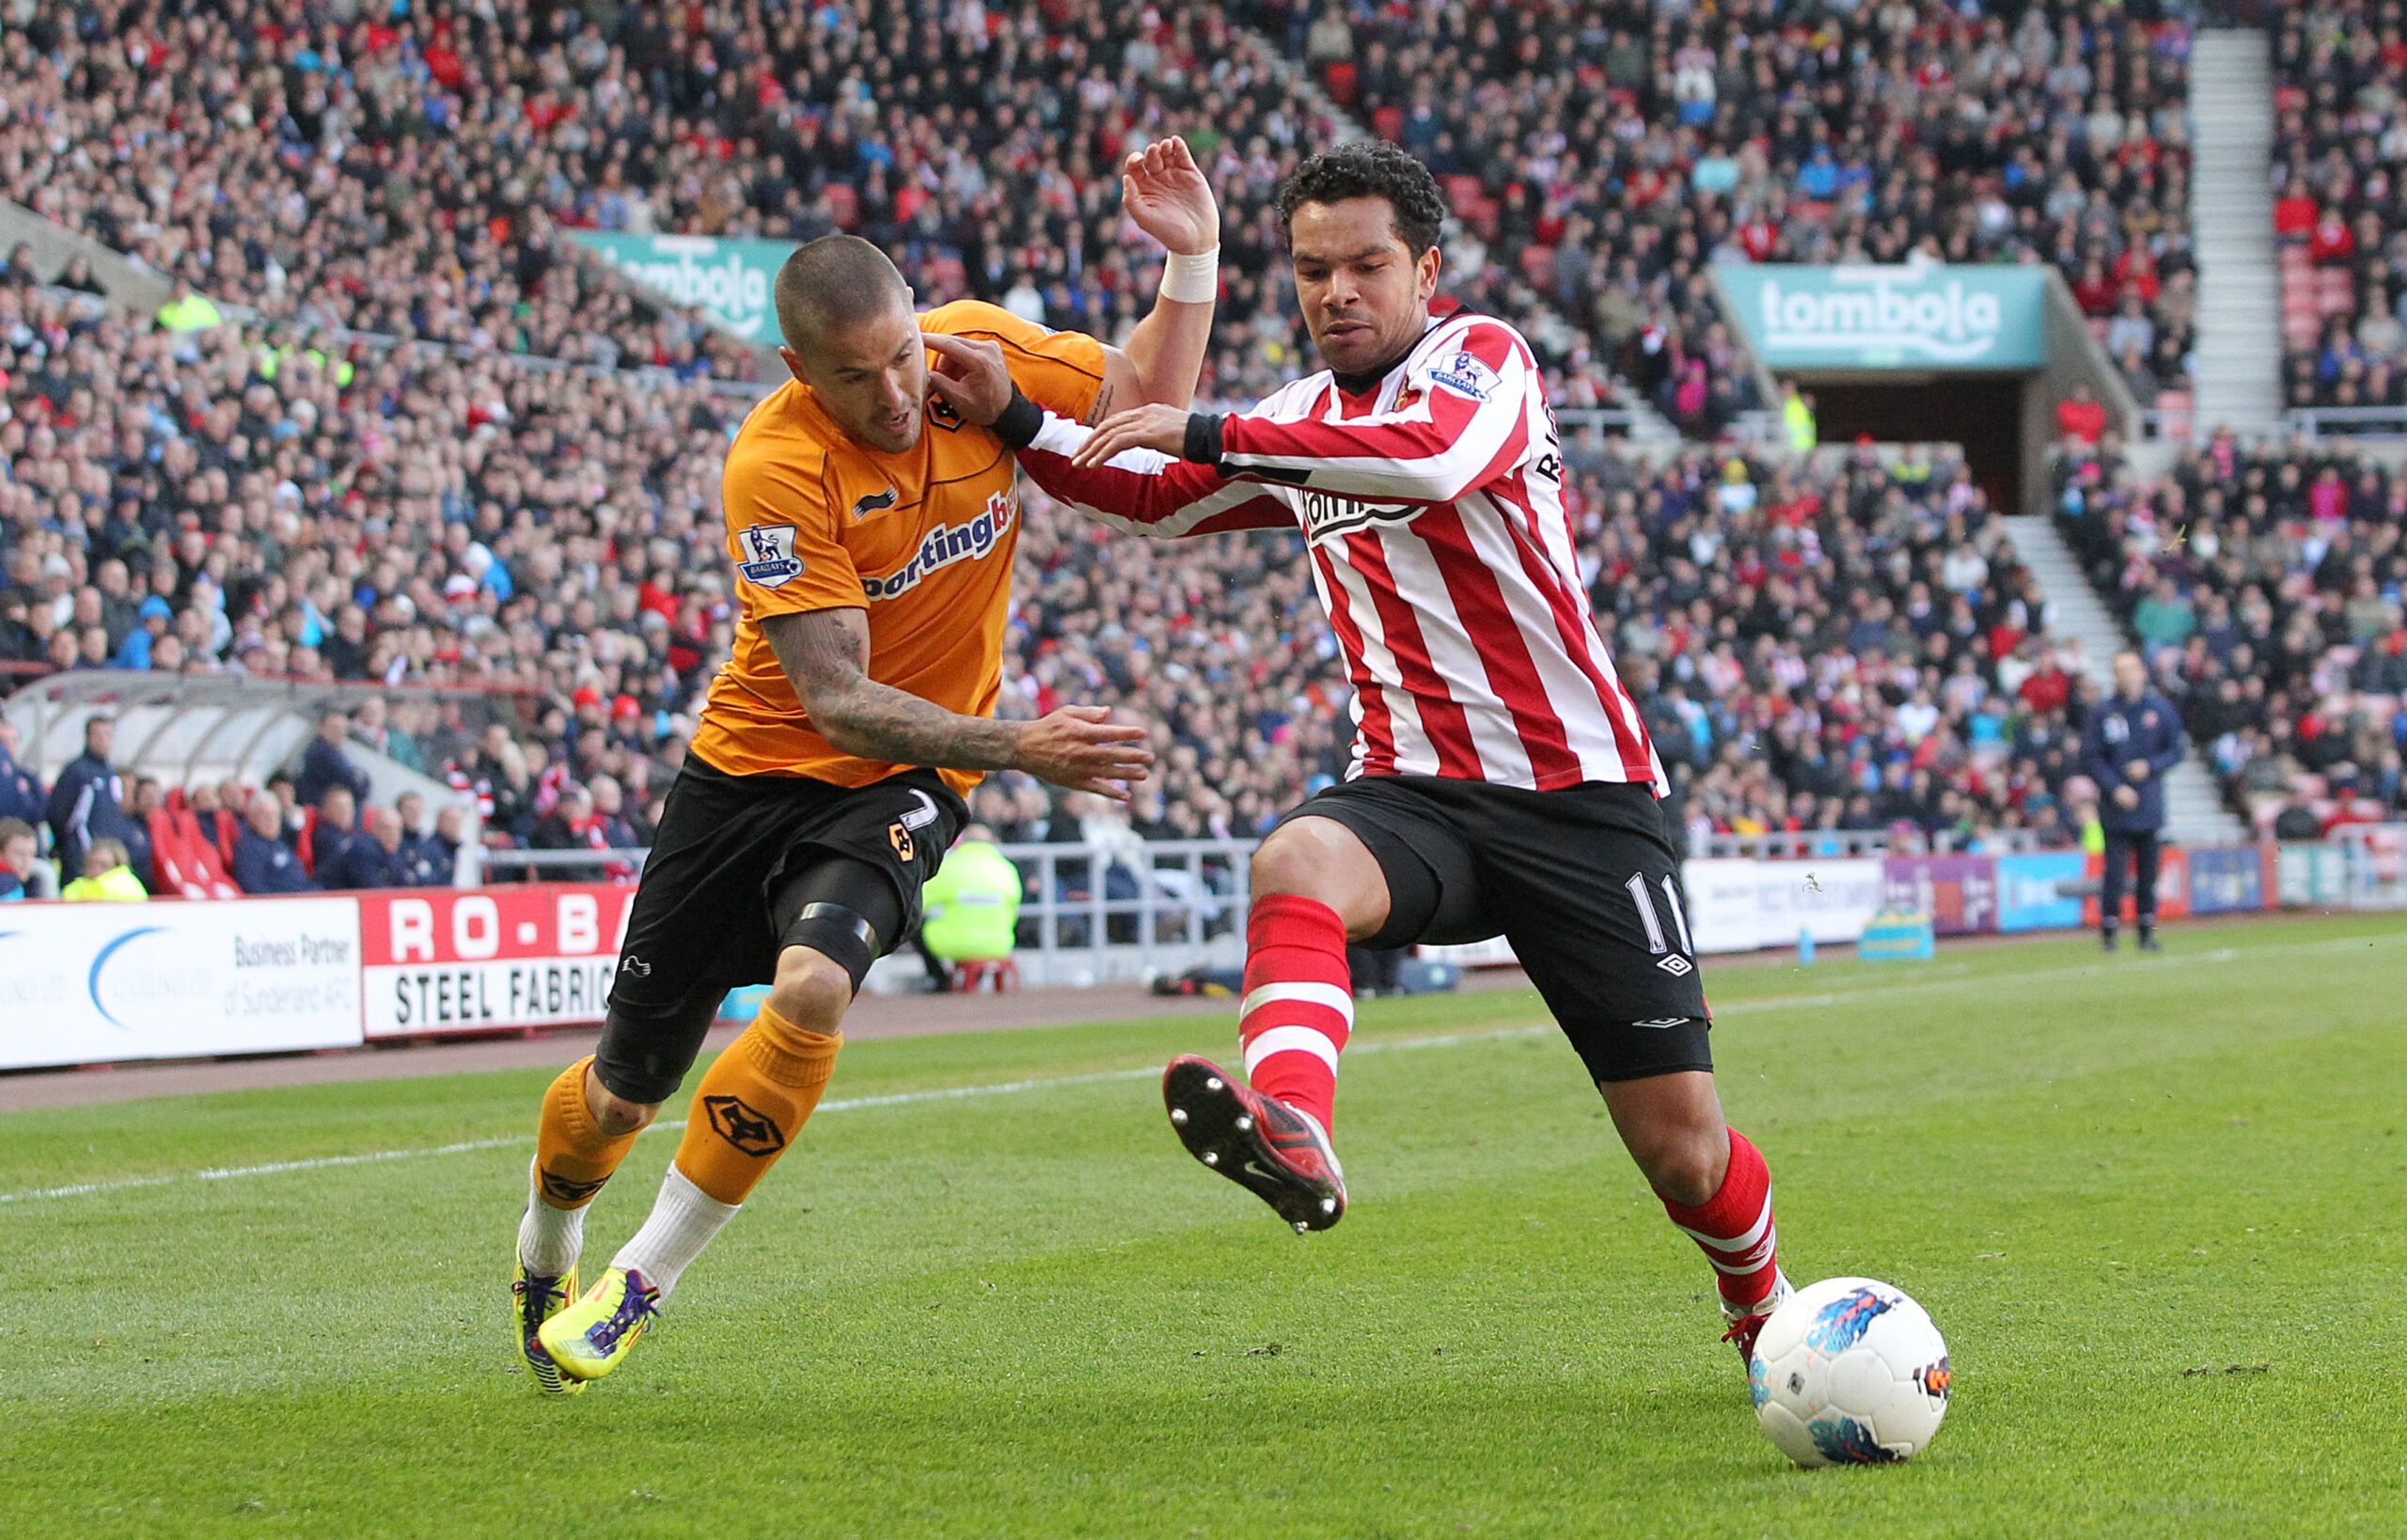 Football - Sunderland v Wolverhampton Wanderers Barclays Premier League  - Stadium of Light  - 14/4/12 
Michael Kightly of Wolves (L) and Kieran Richardson of Sunderland in action 
Mandatory Credit: Action Images / Ed Sykes 
Livepic 
EDITORIAL USE ONLY. No use with unauthorized audio, video, data, fixture lists, club/league logos or live services. Online in-match use limited to 45 images, no video emulation. No use in betting, games or single club/league/player publications.  Please contact your